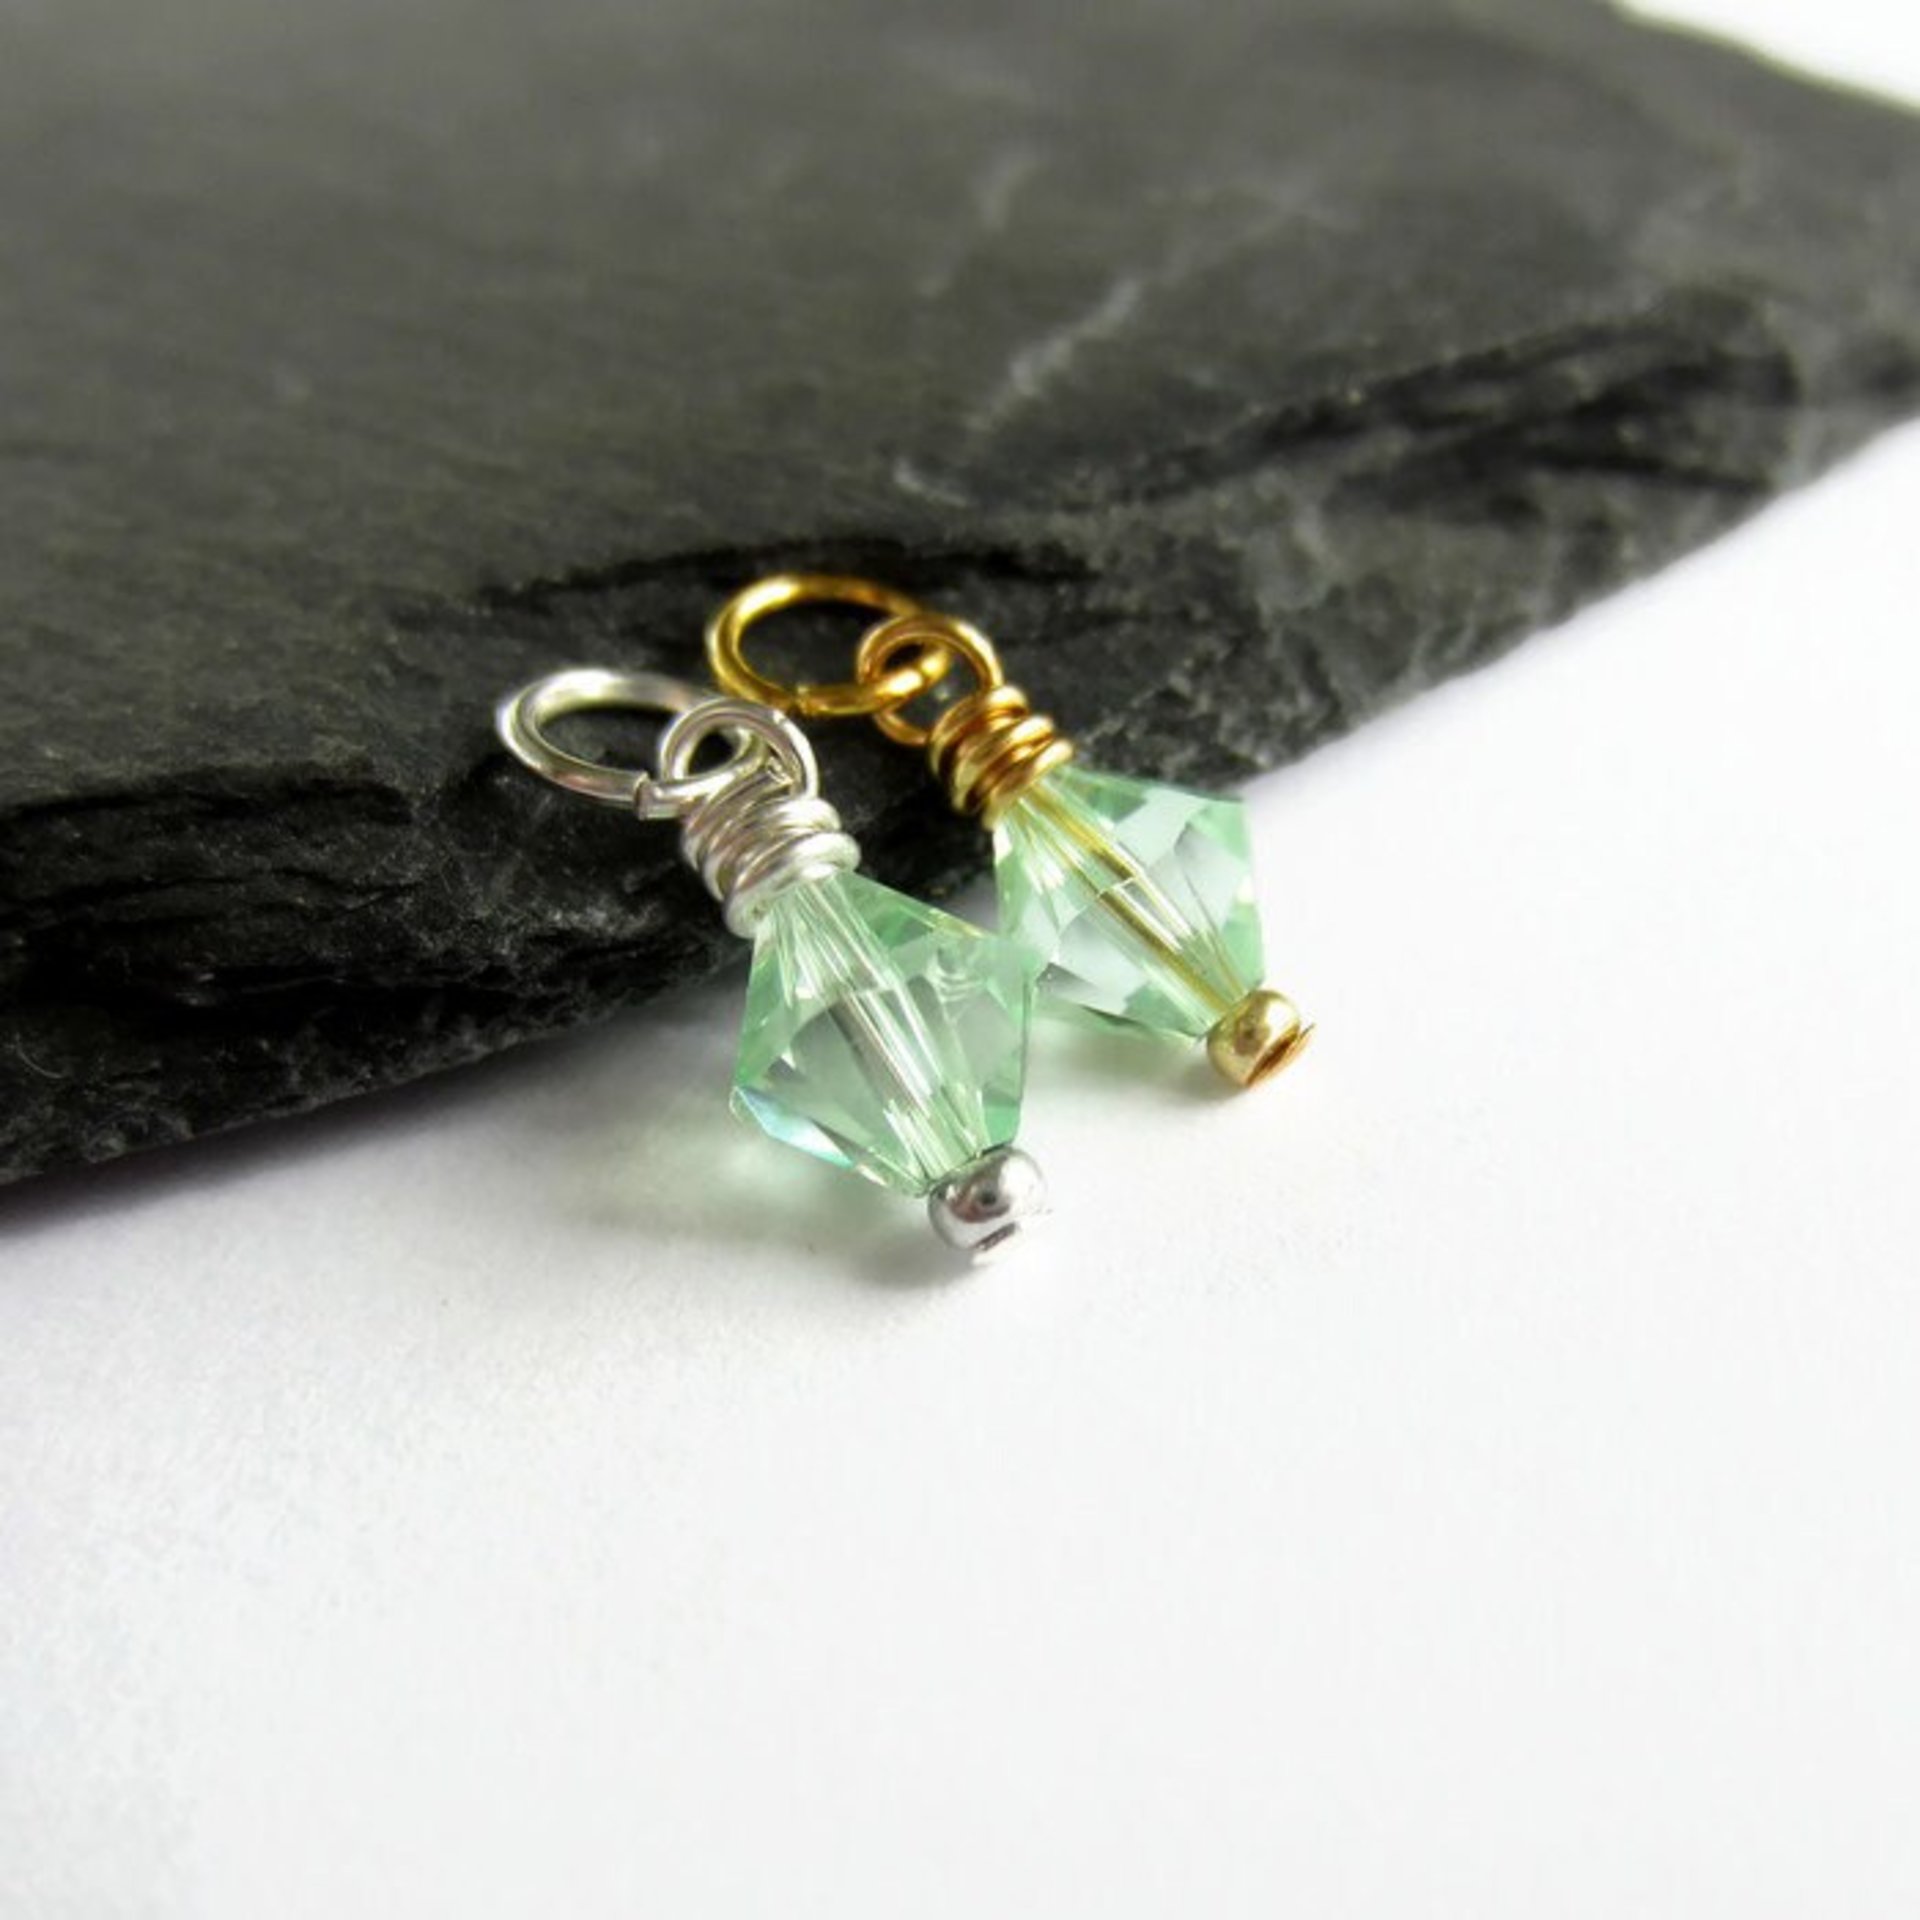 Pale Chrysolite Green Crystal Charm ~ Handmade by The Tiny Tree Frog Jewellery